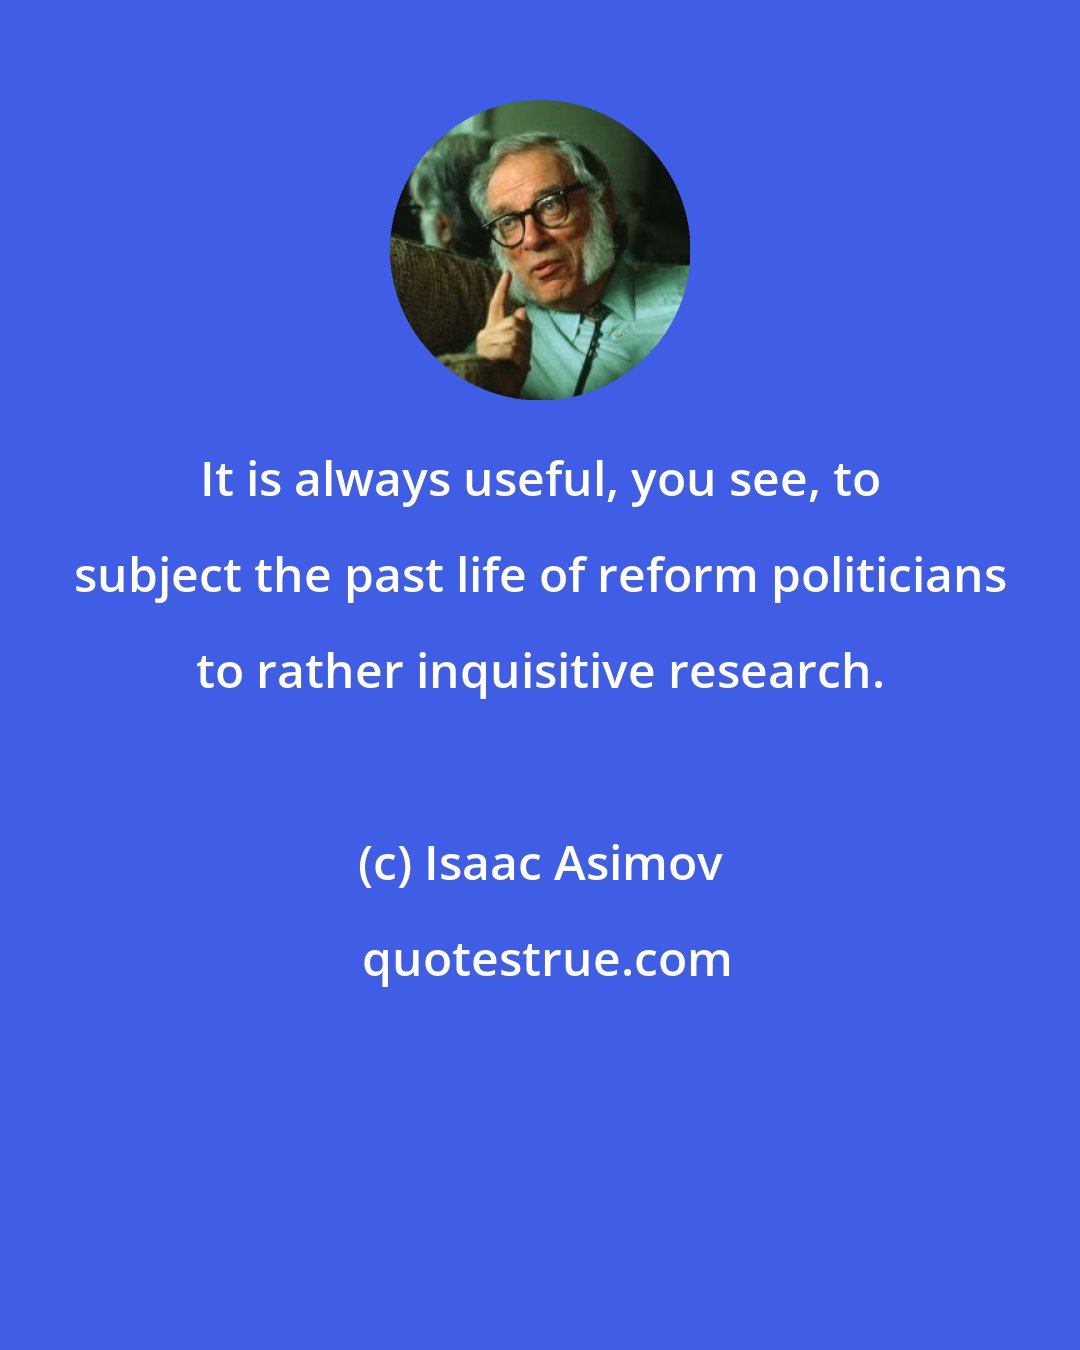 Isaac Asimov: It is always useful, you see, to subject the past life of reform politicians to rather inquisitive research.